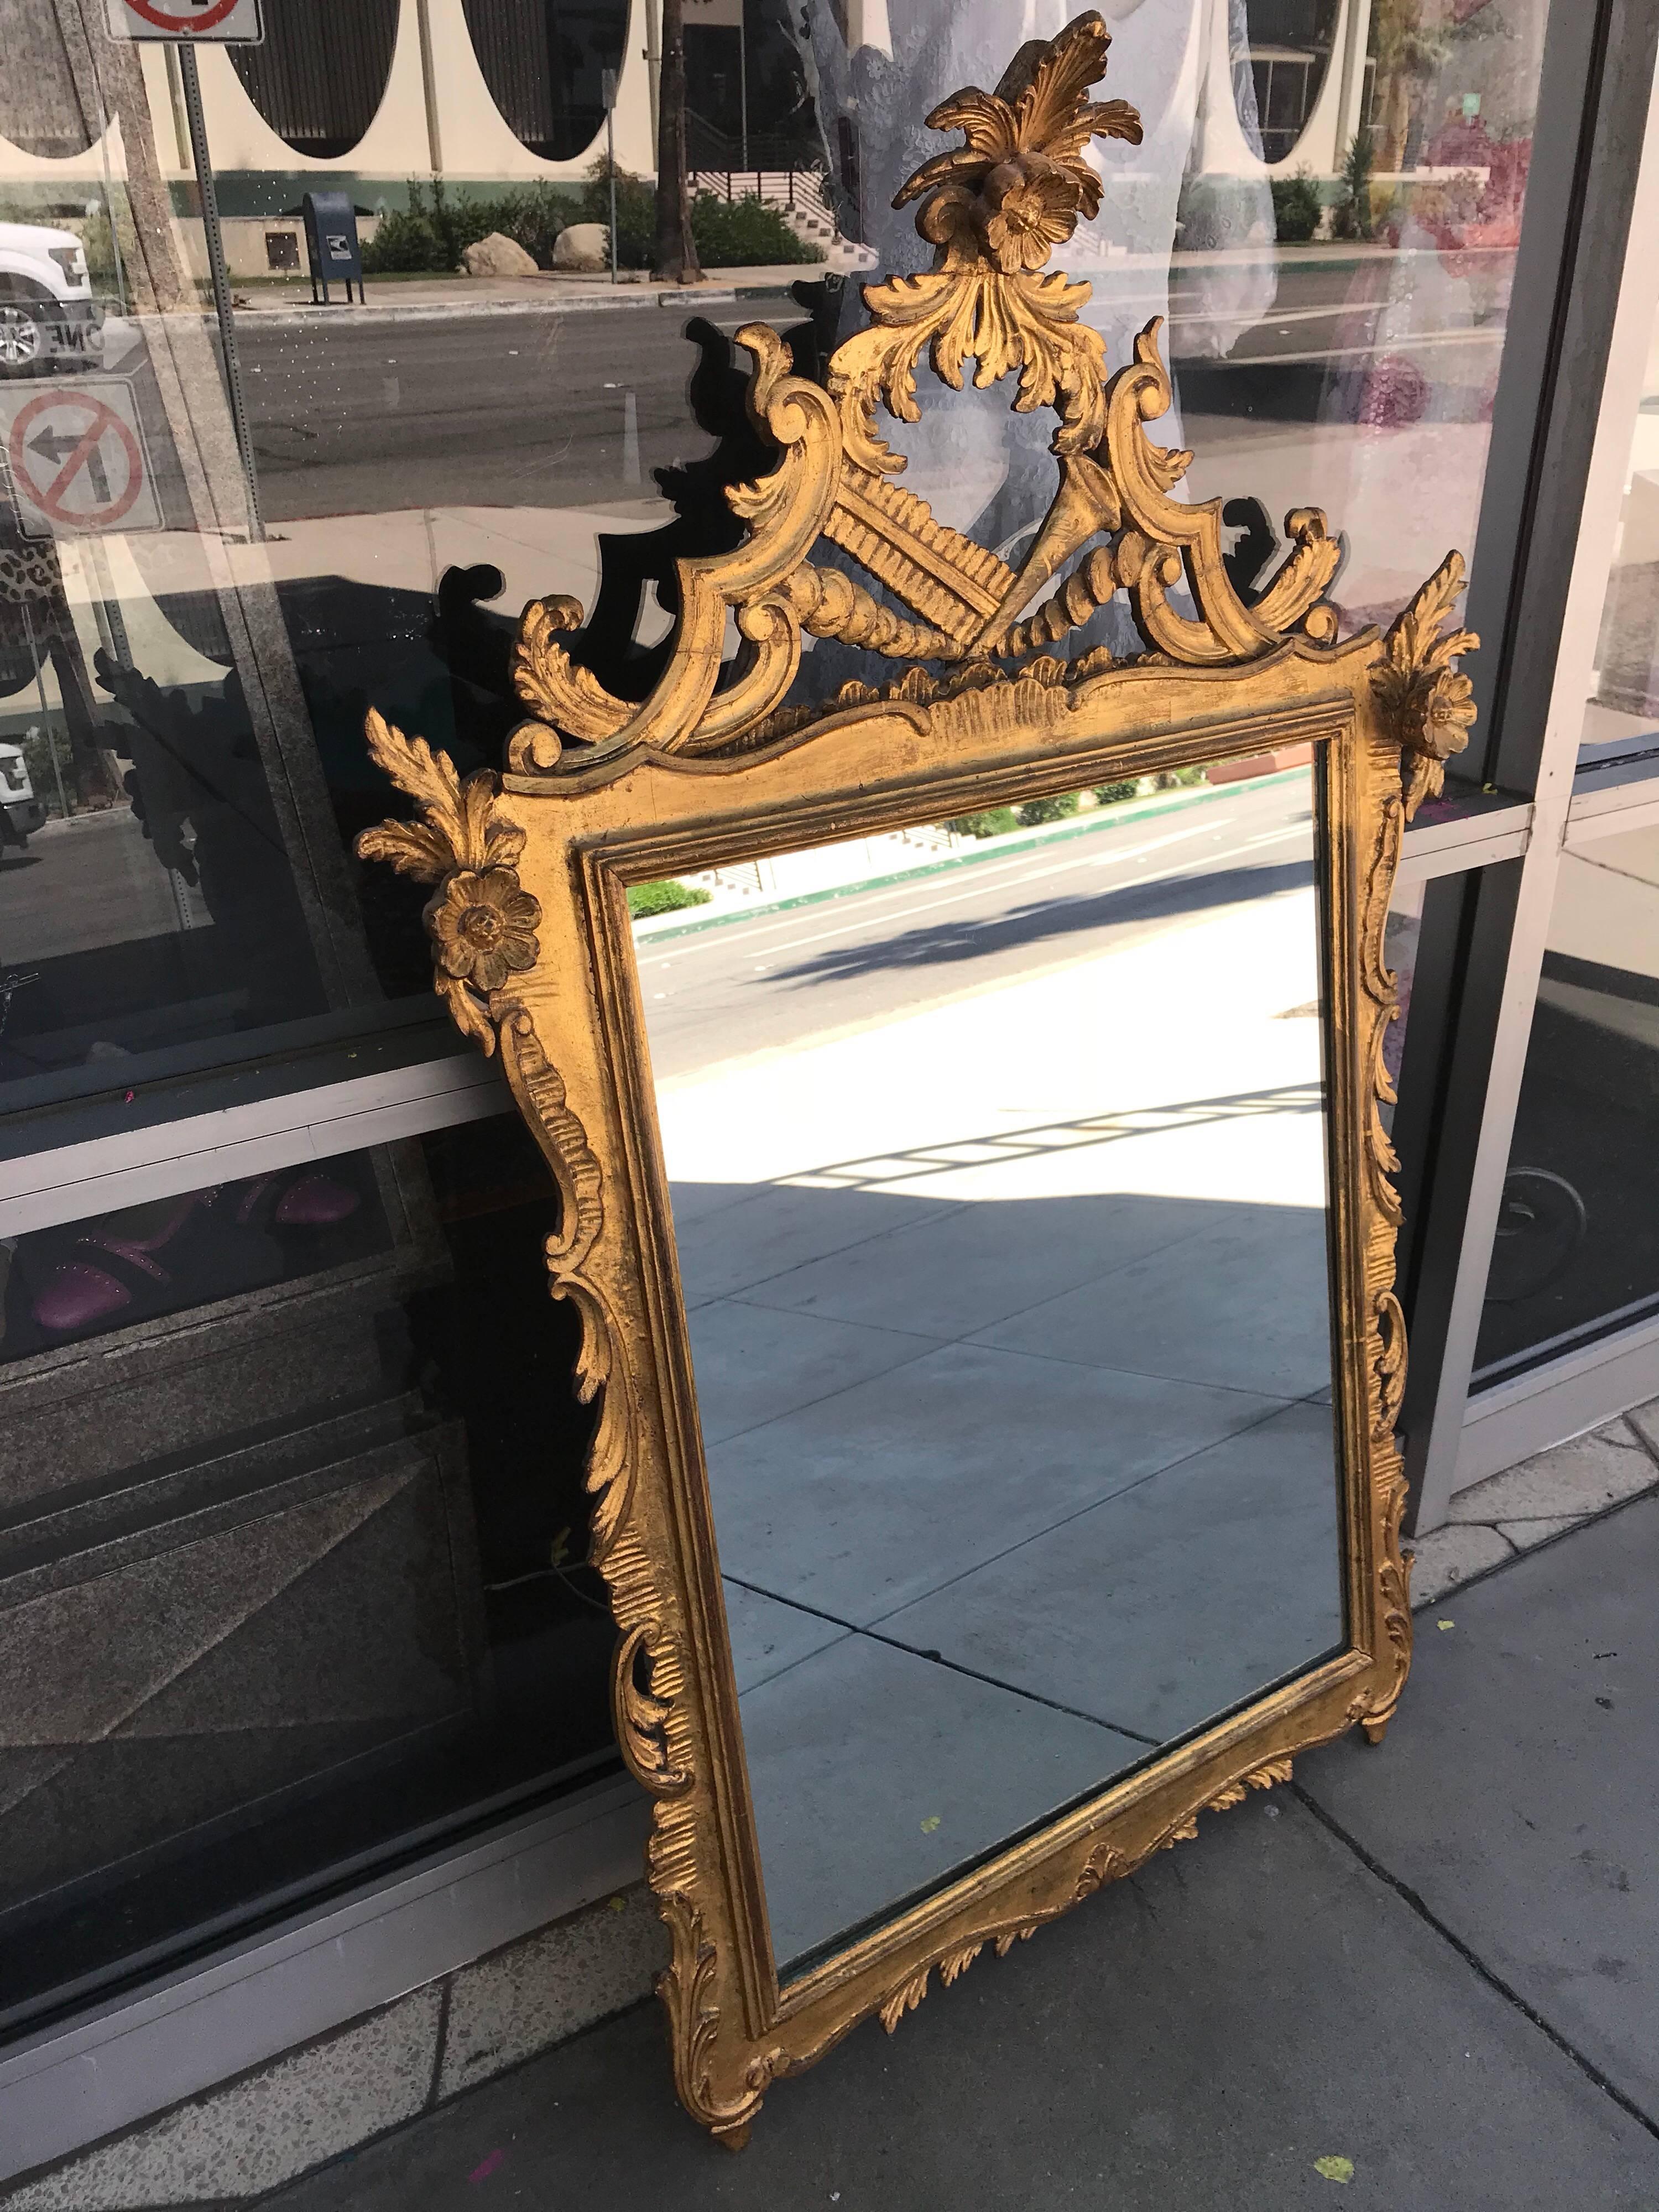 This is a very high end vintage mirror, made in the 1950s. Beautifully detailed in gold, the mirror is solid wood construction. From a very chic Palm Springs estate. Looks like the crown of mirror has been repaired previously. Not easily noticeable. 